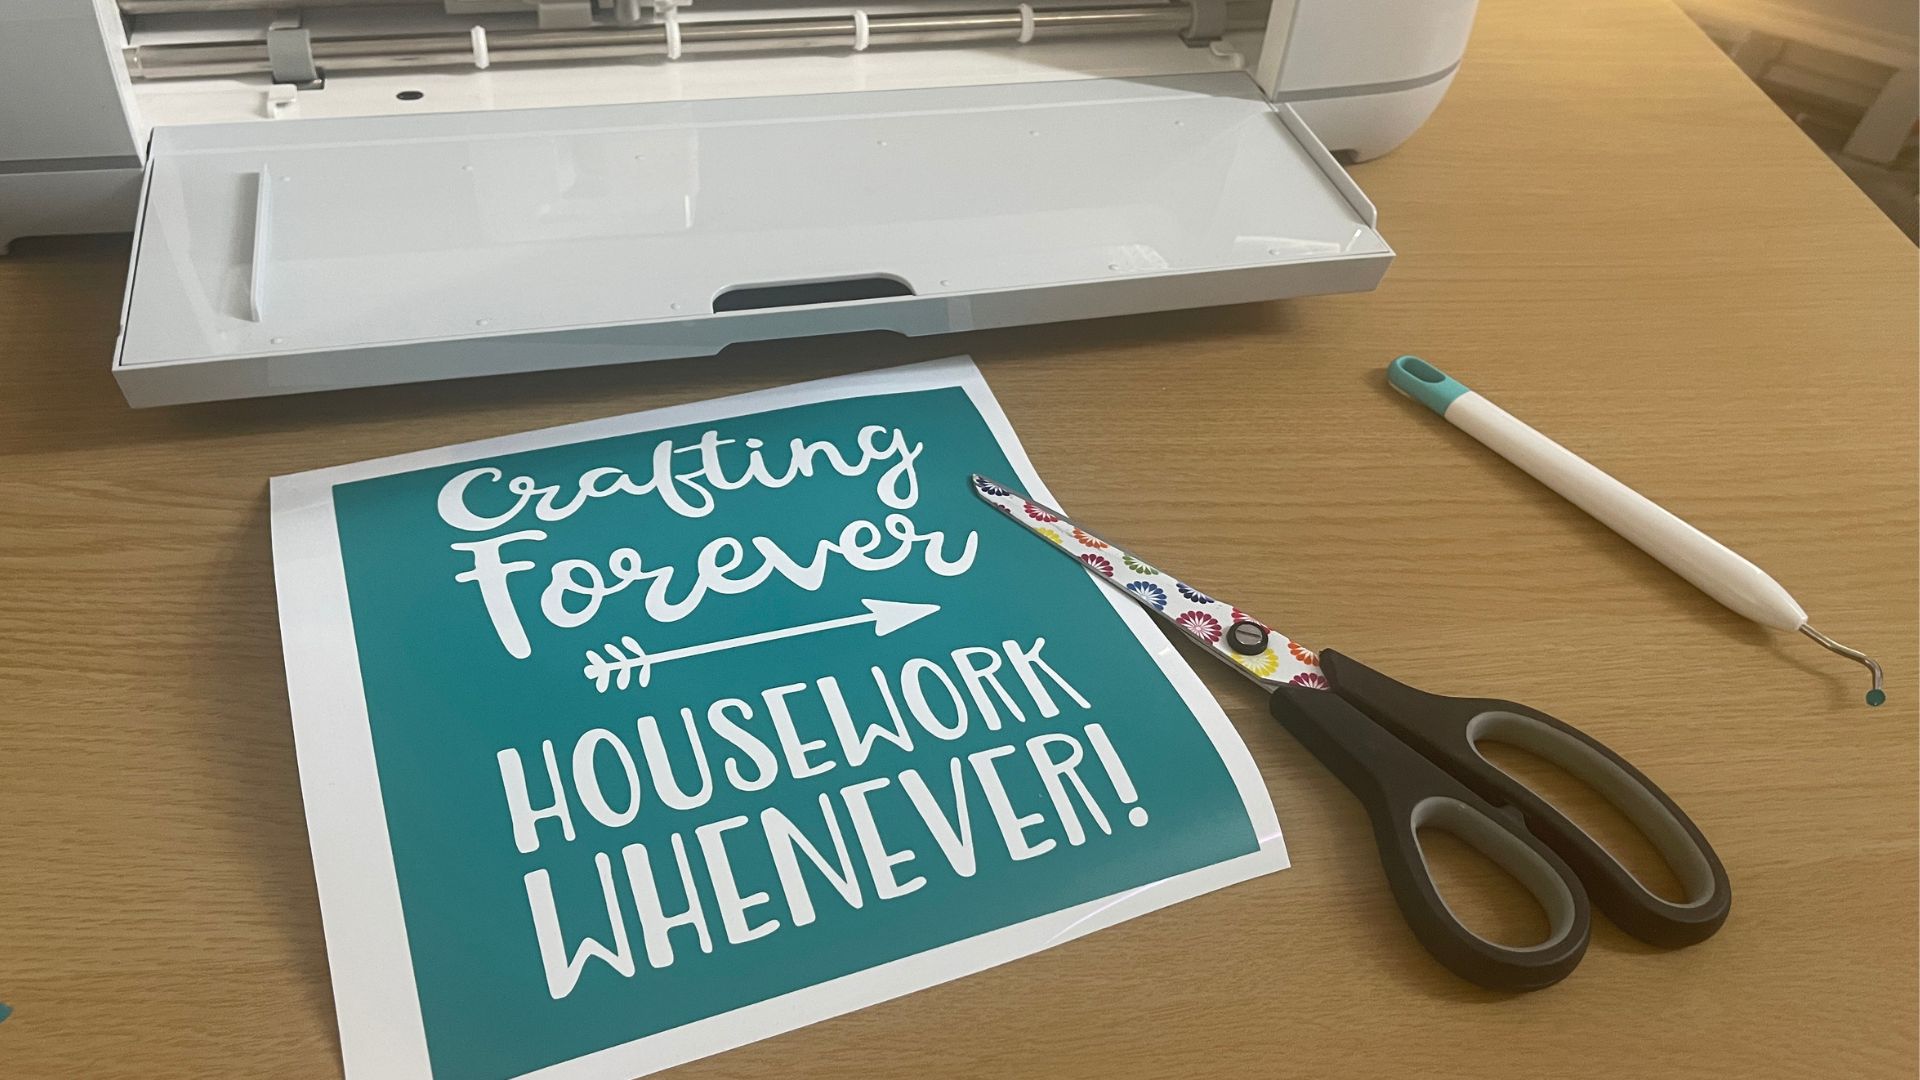 How to make a stencil with Cricut